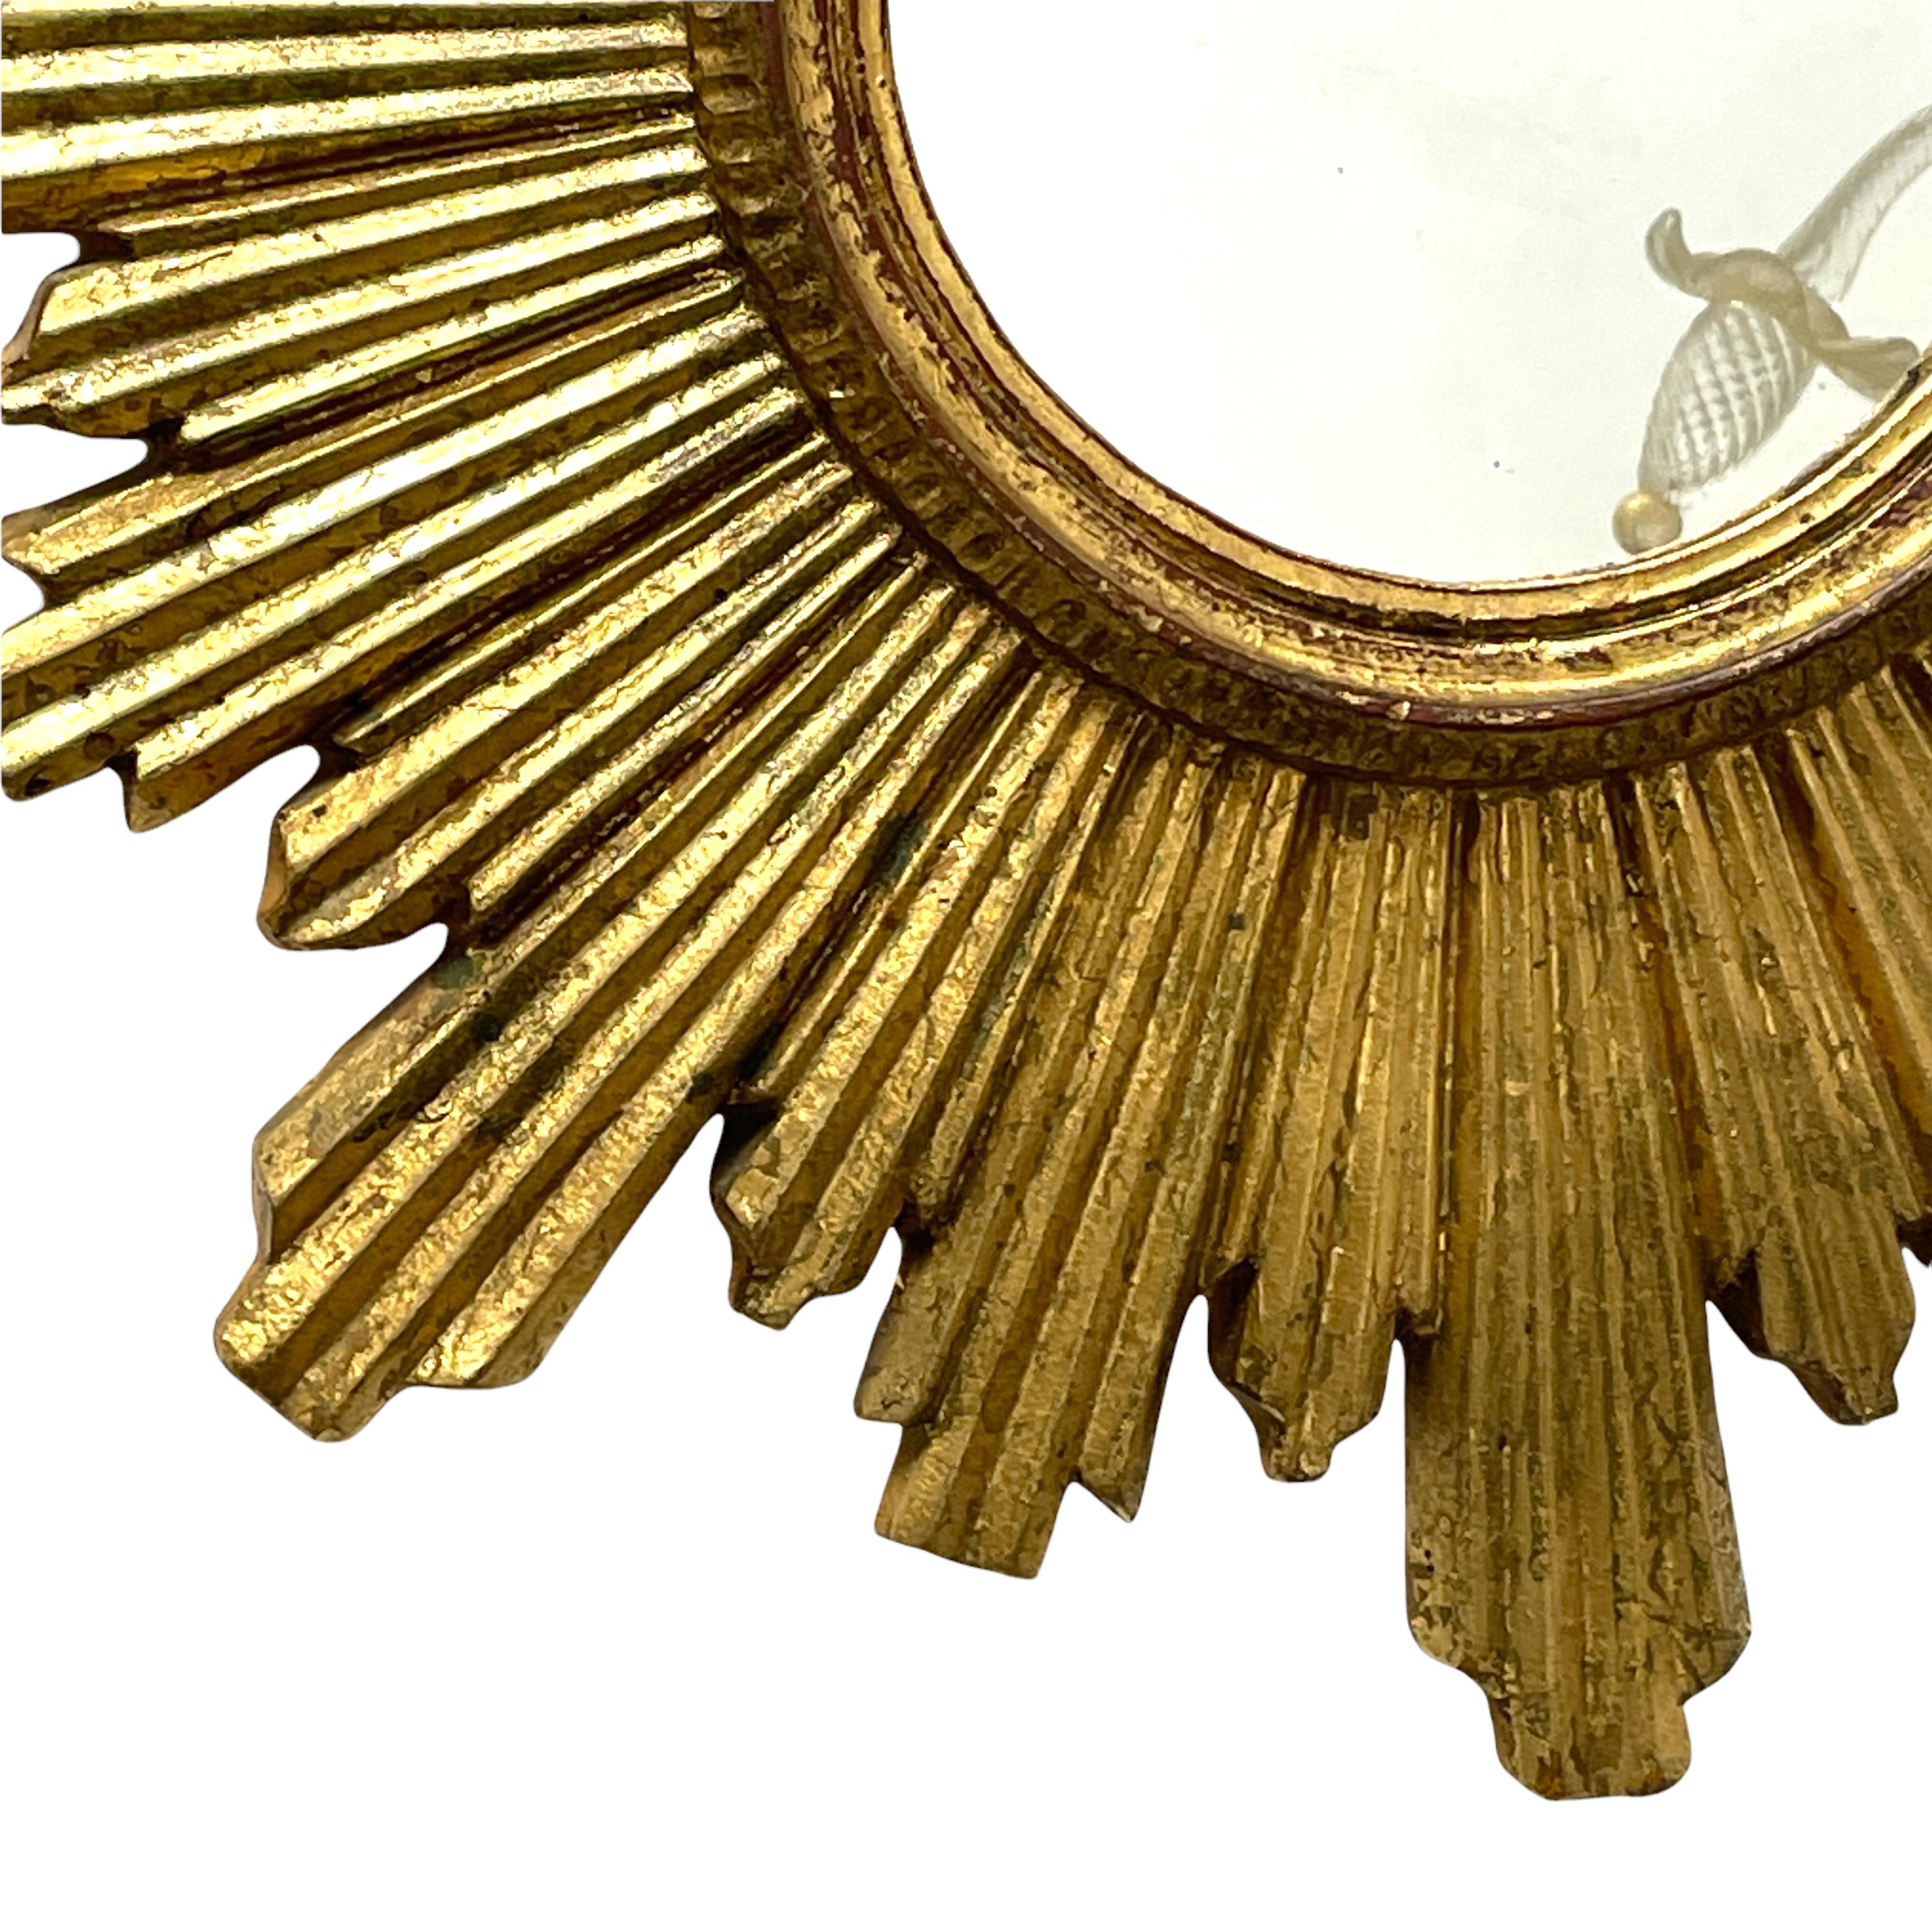 A gorgeous starburst sunburst mirror. Made of gilded wood and stucco. It measures approximate: 23